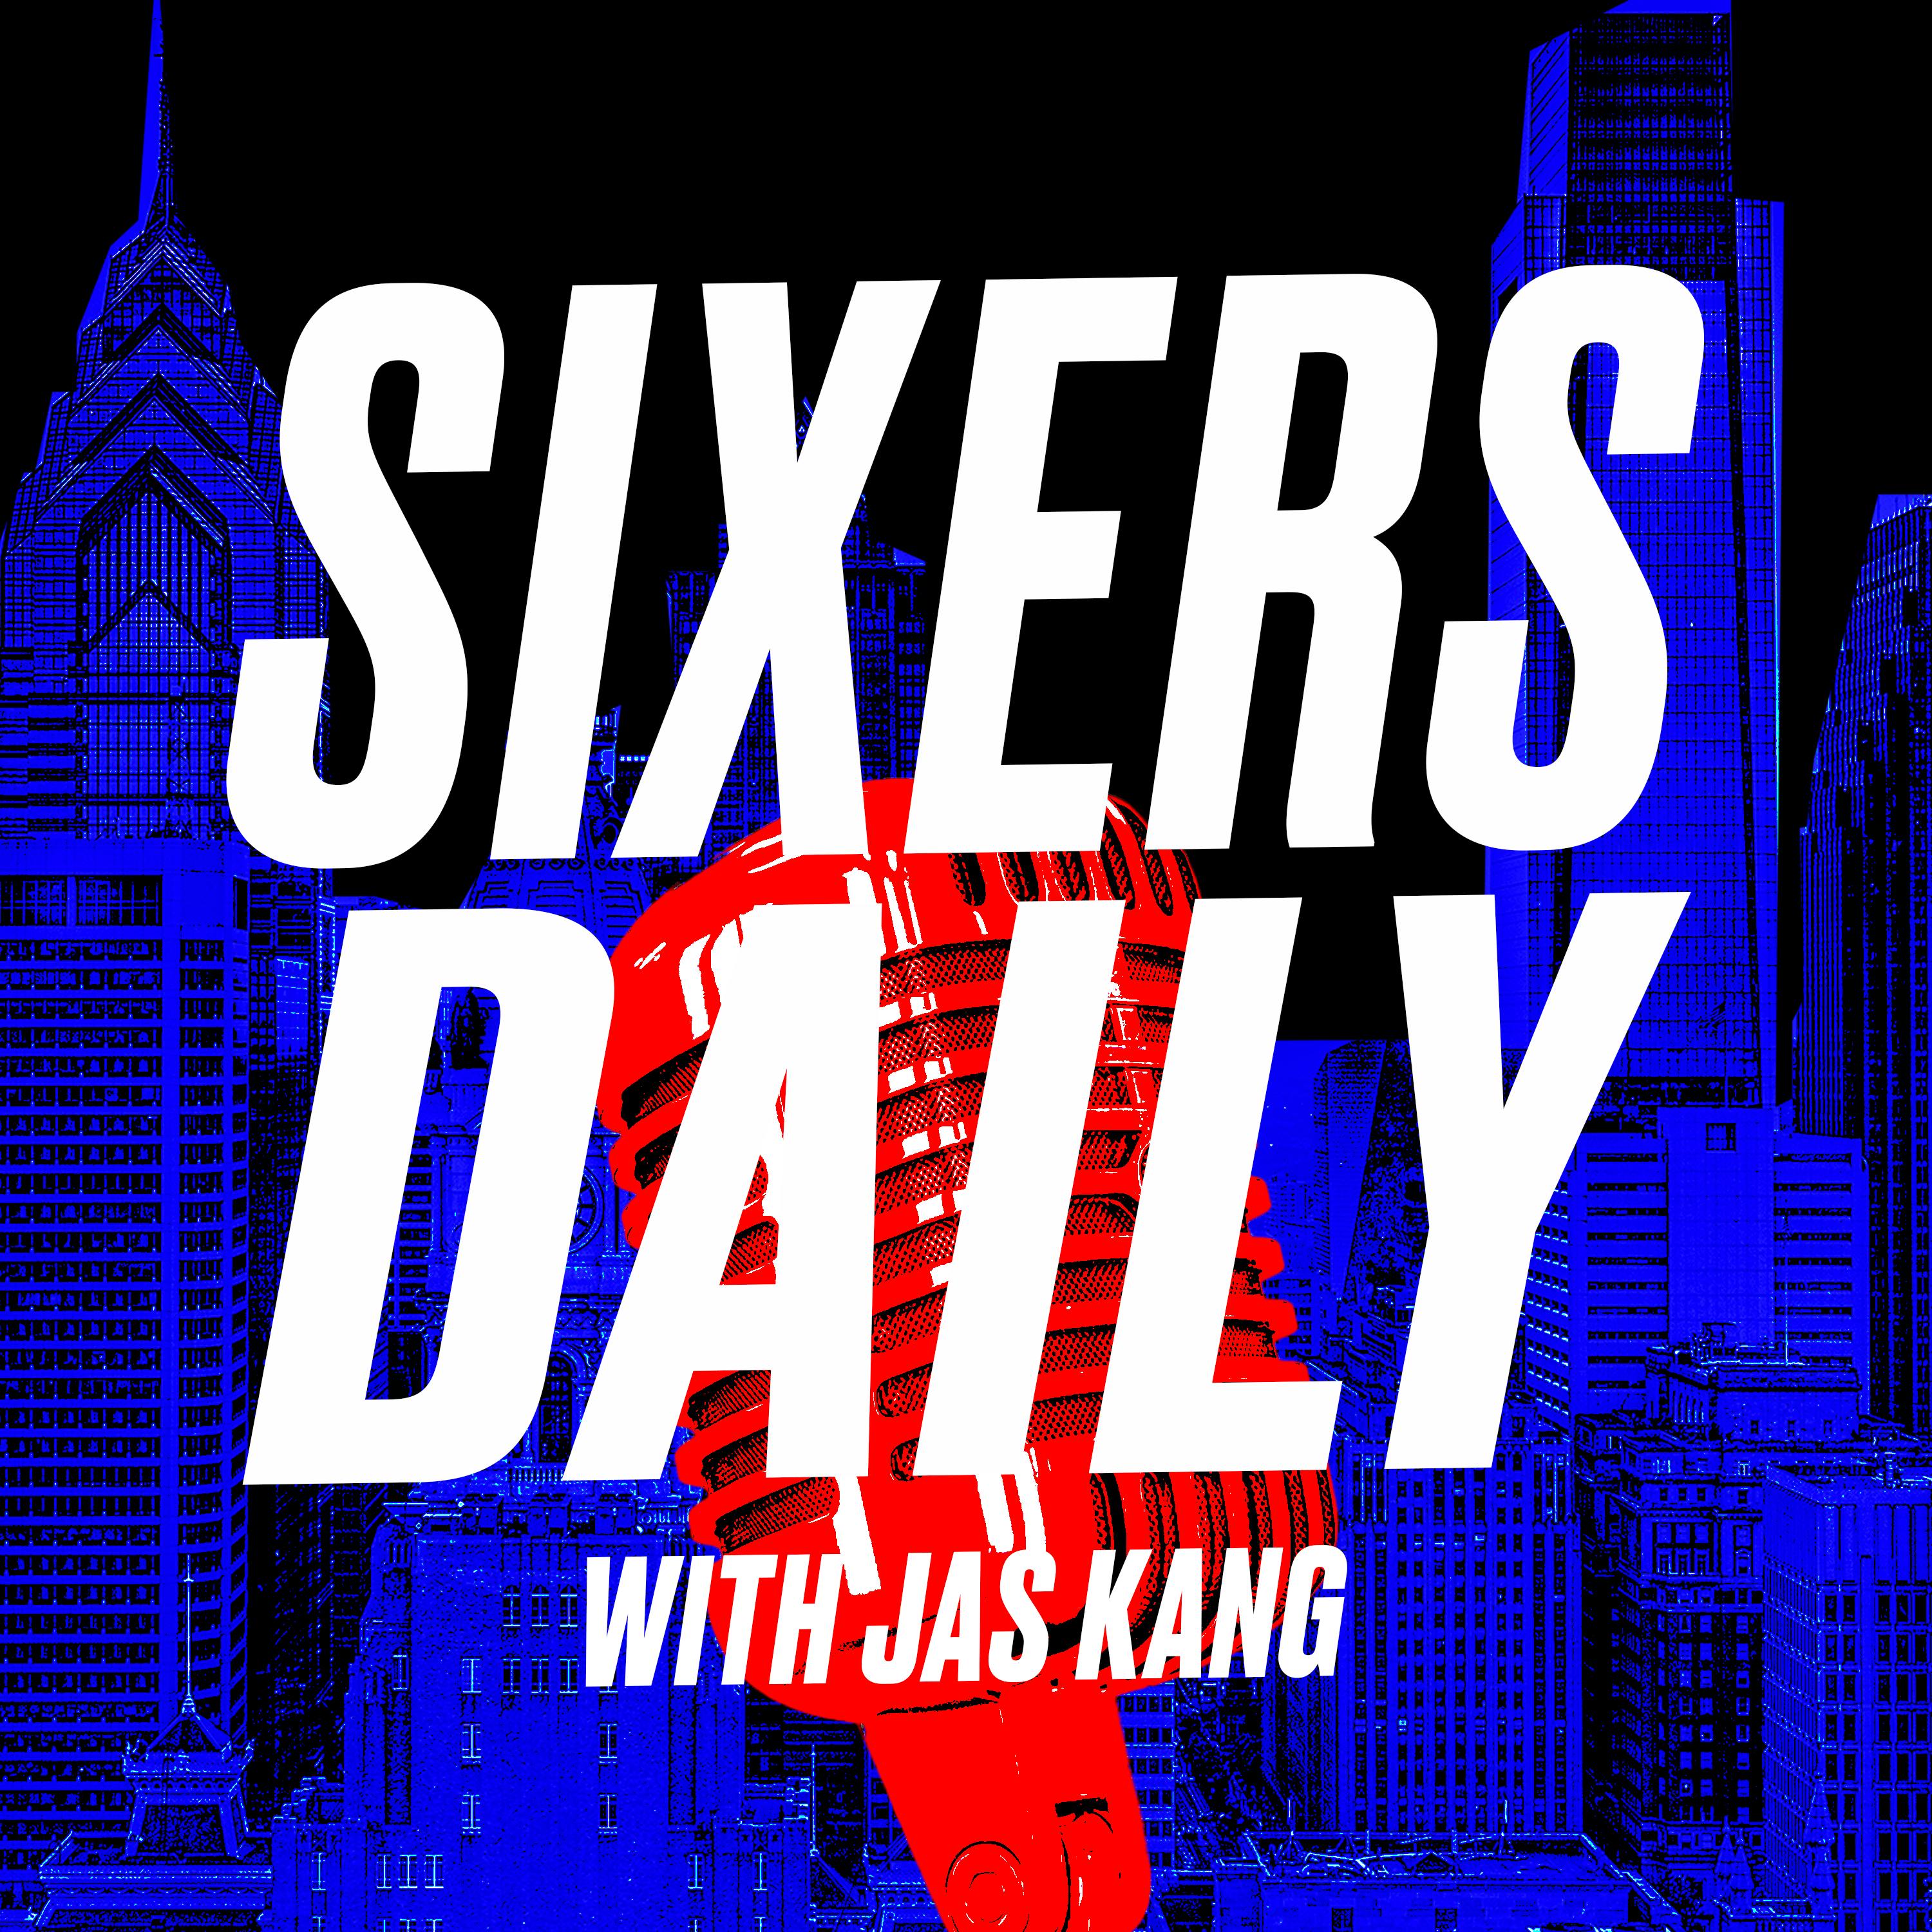 Sixers Daily with Jas Kang (Part 1) - LSU Tigers assistant coach Tasmin Mitchell on 2022 NBA Draft prospect Tari Eason and his potential fit with the 76ers